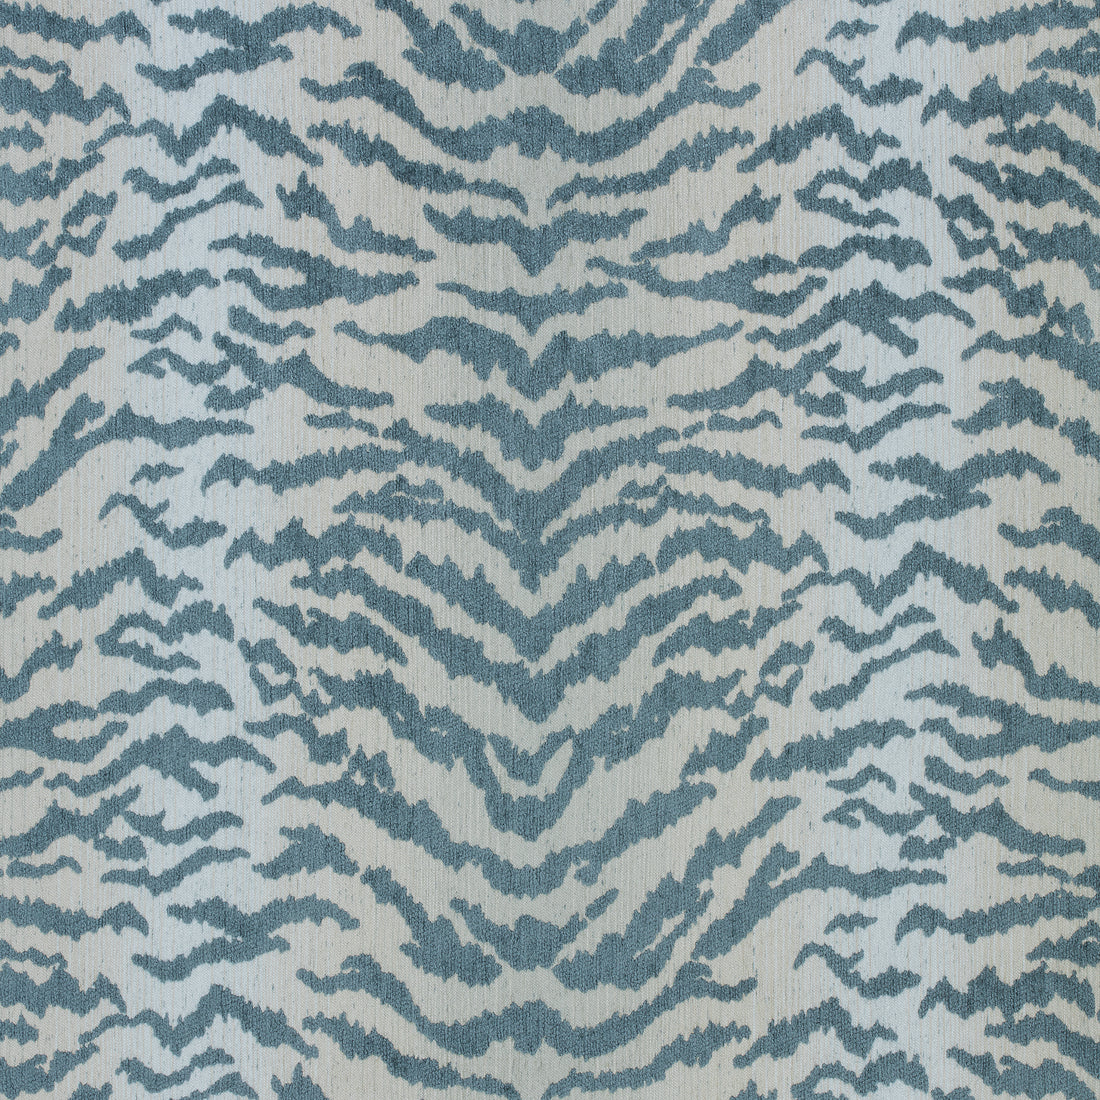 Aja fabric in mineral color - pattern number W80448 - by Thibaut in the Woven Resource Vol 10 Menagerie collection